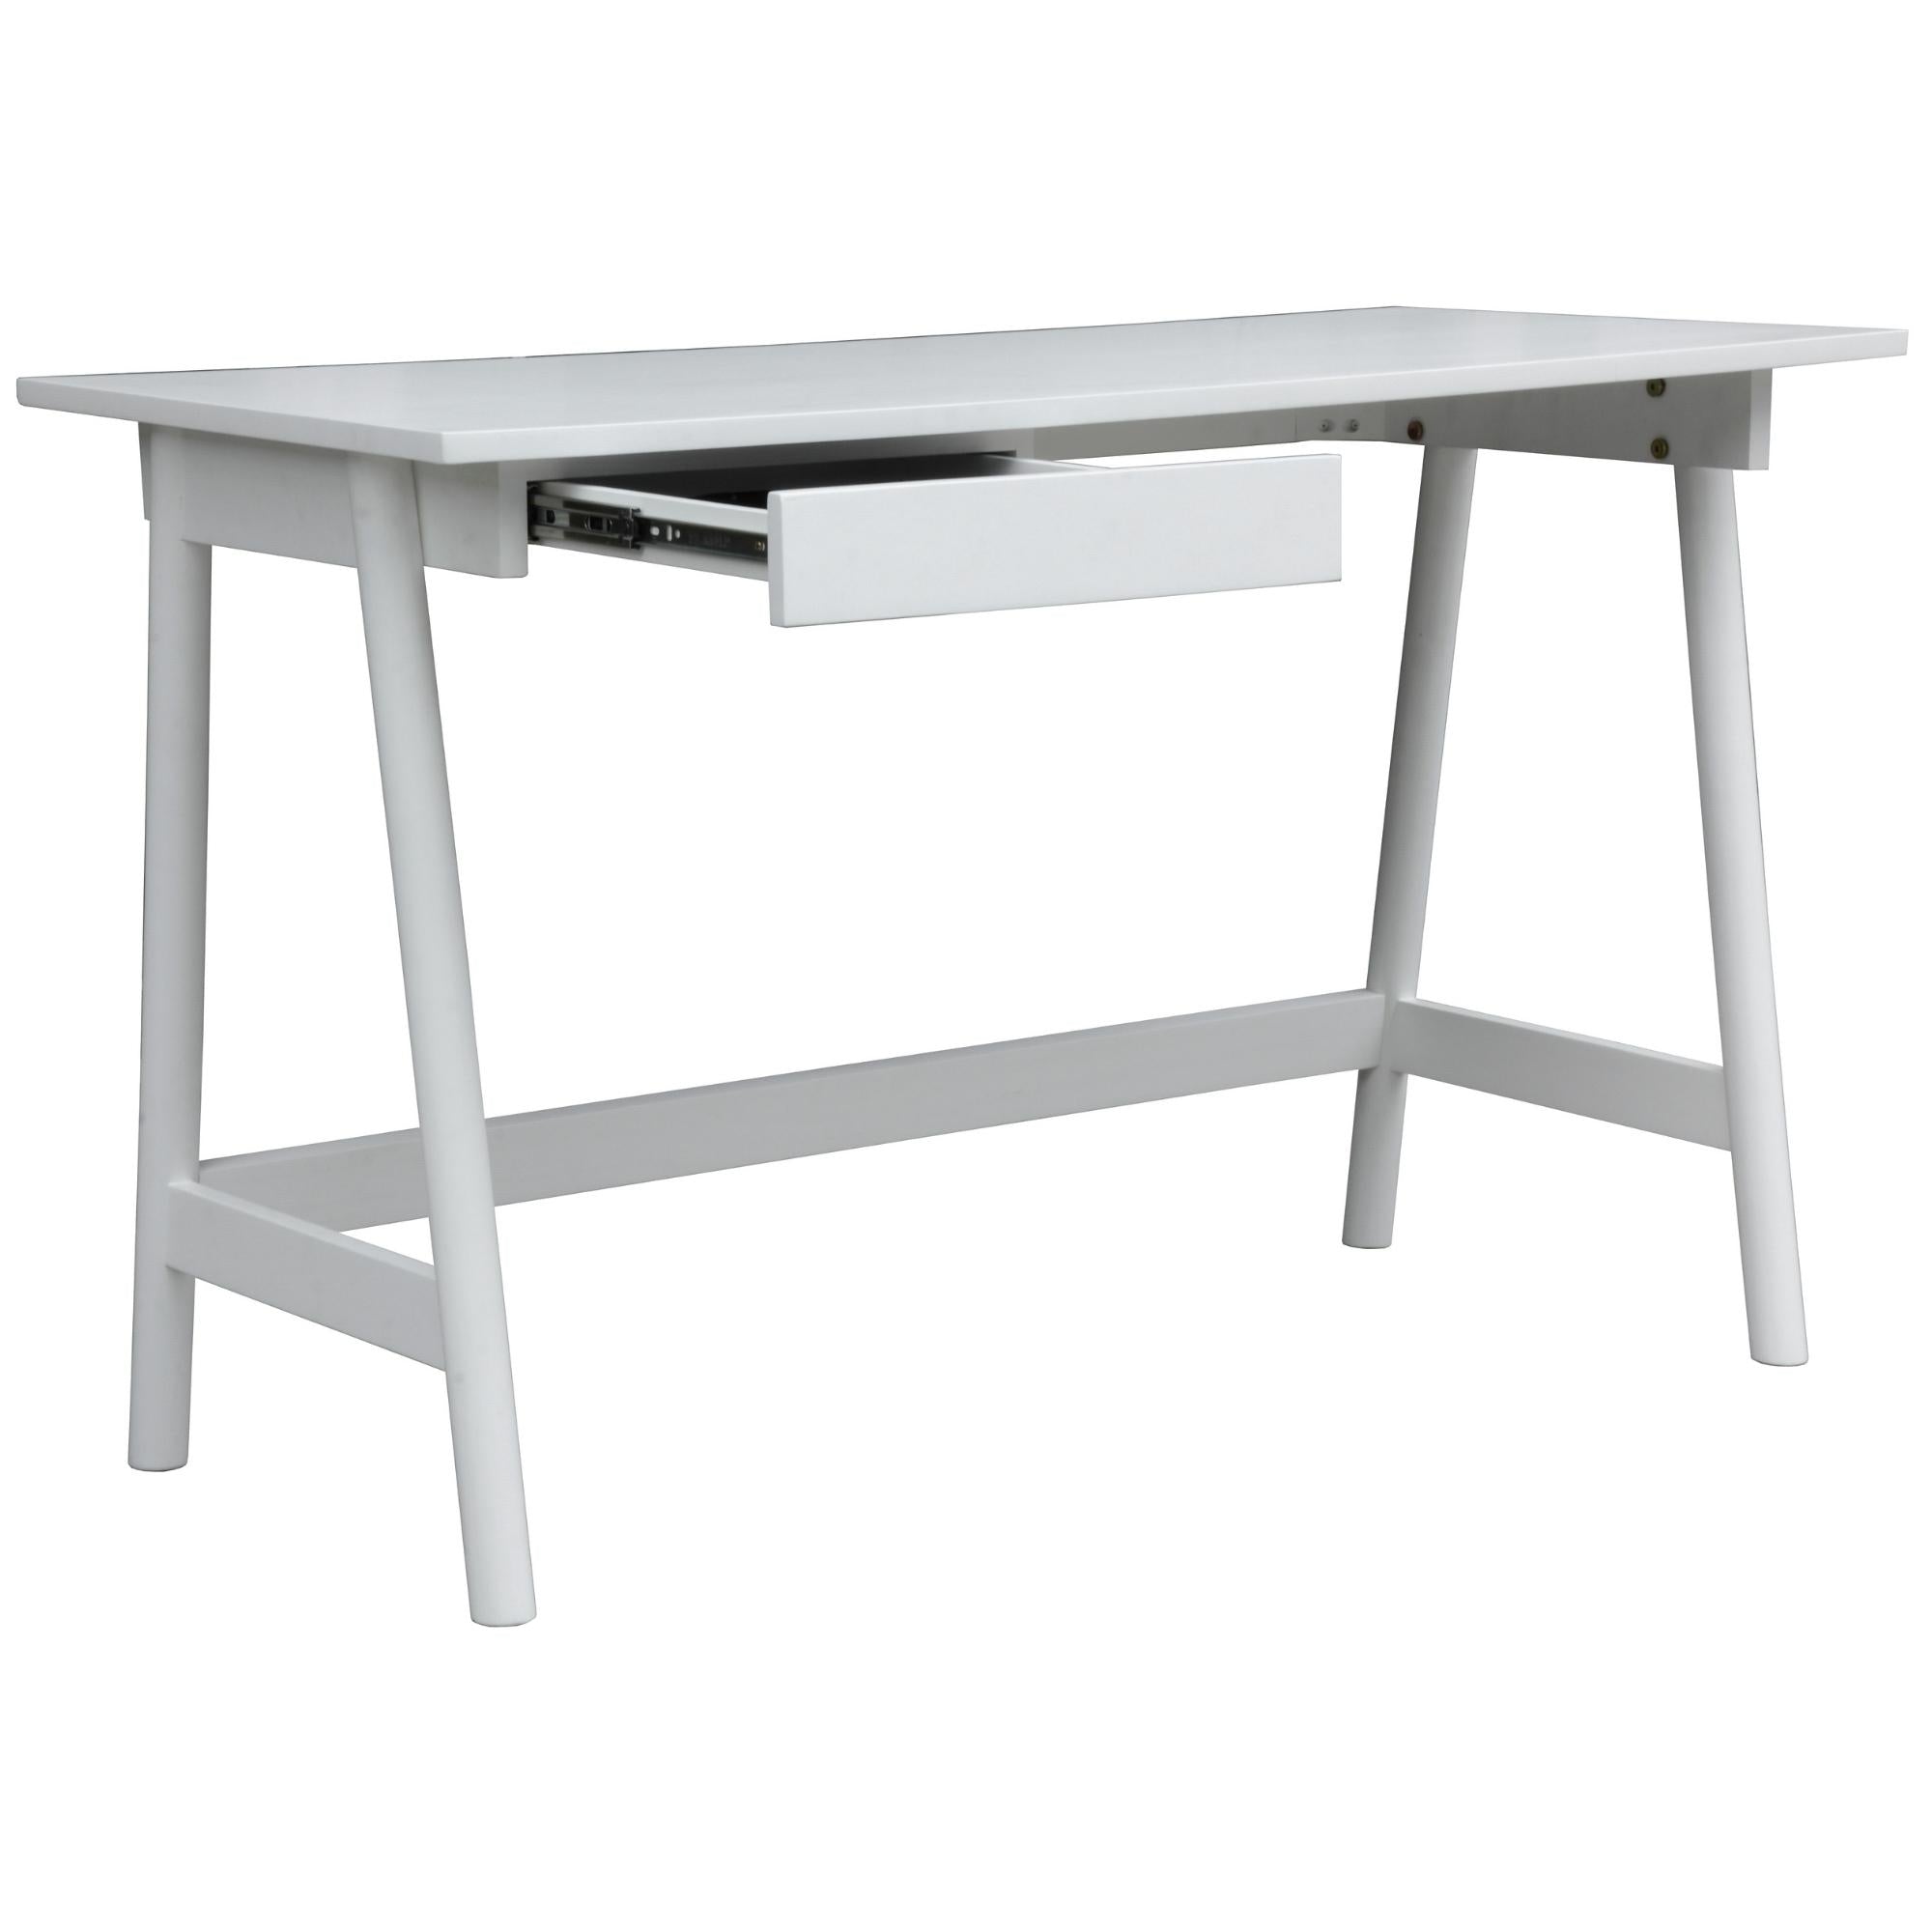 Office Desk Student Study Table Solid Wooden Timber Frame - White